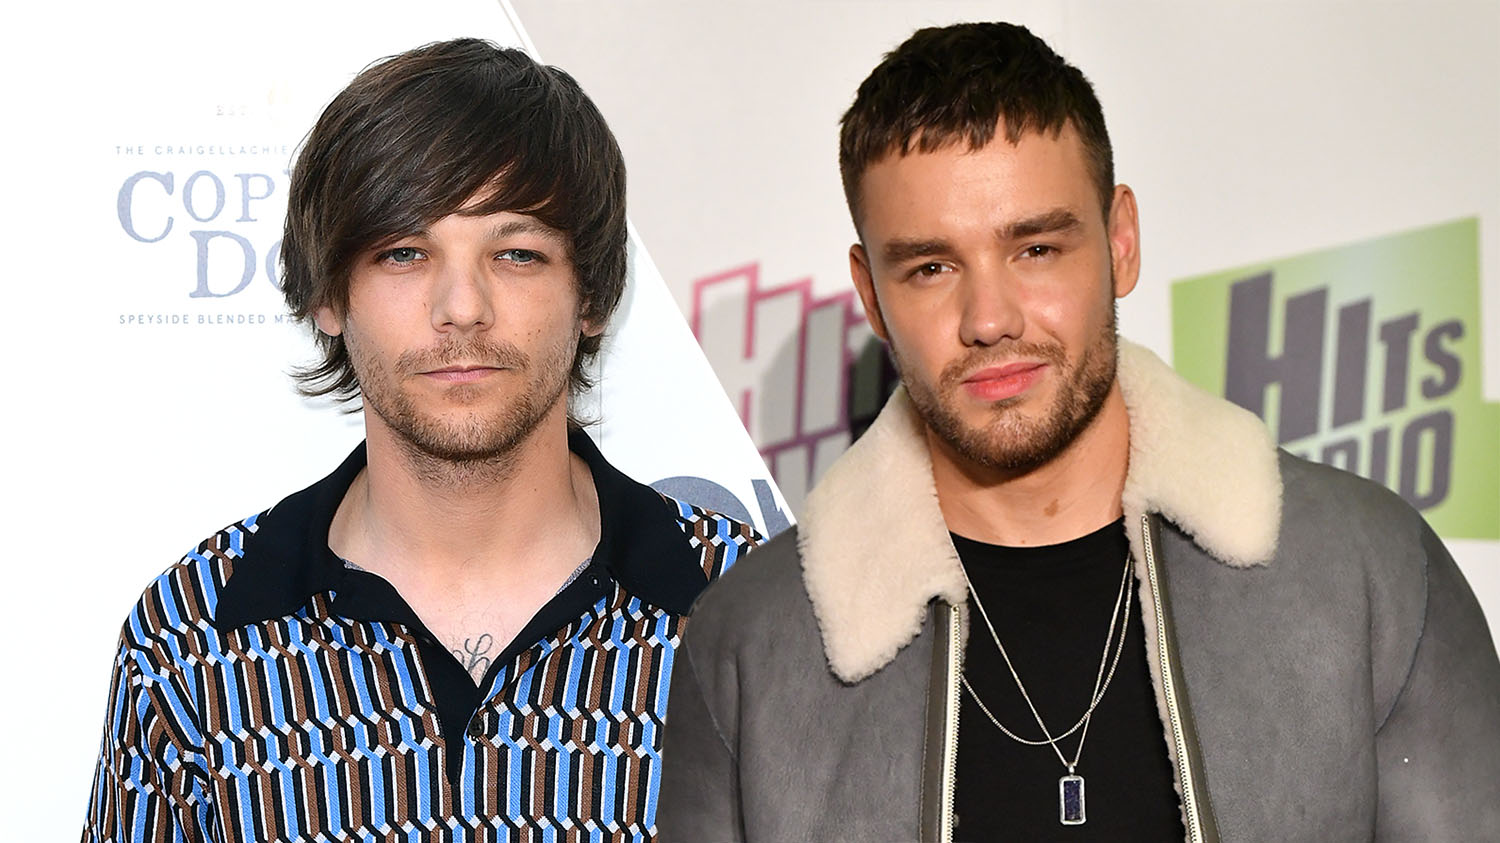 EXCLUSIVE: One Direction fans meltdown as Louis Tomlinson watches